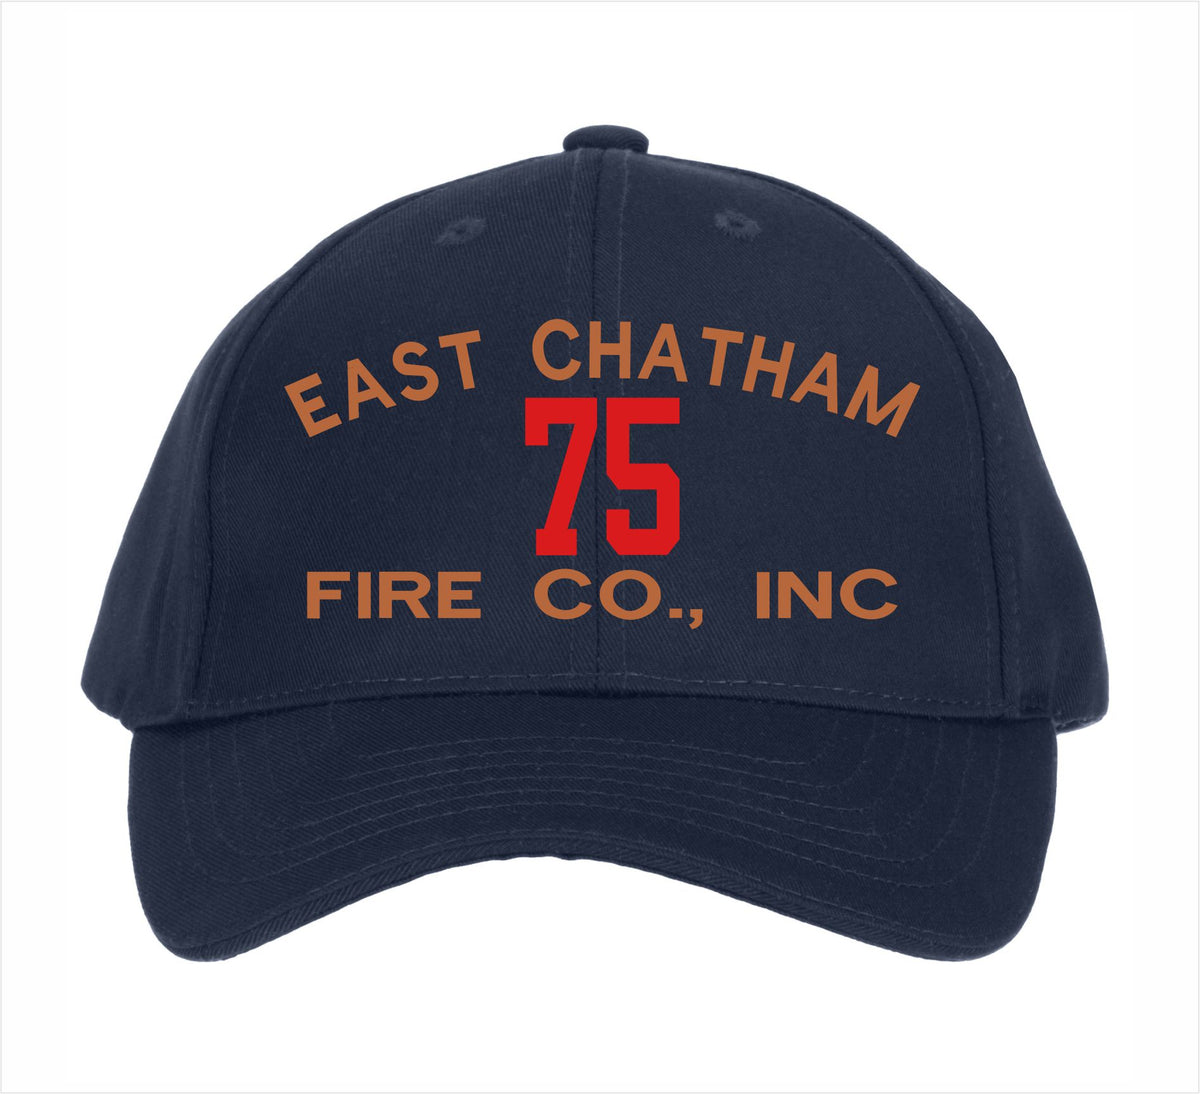 East Chatham 75 FC Embroidered Hat